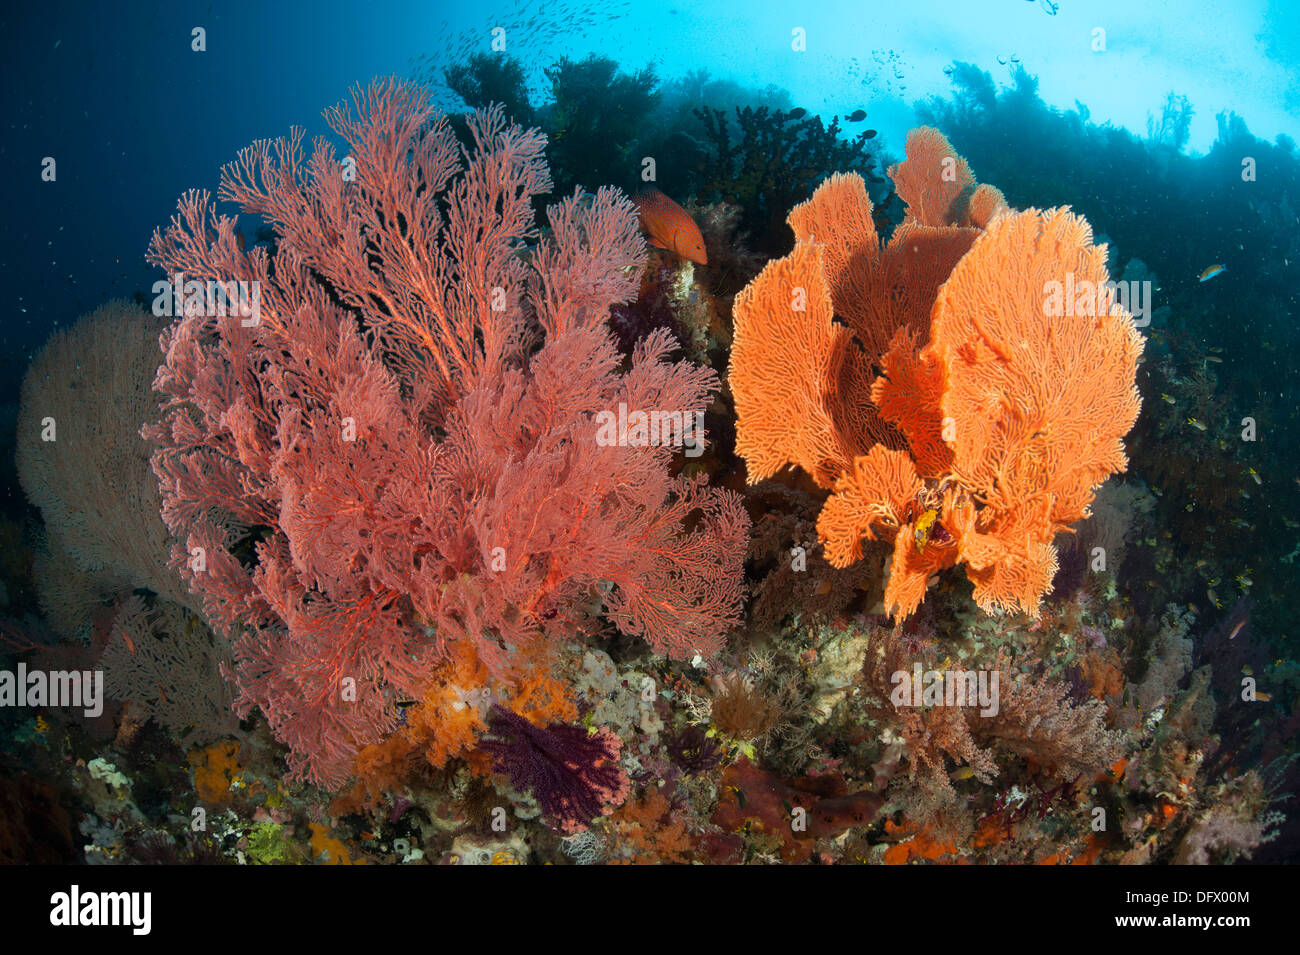 Reefscape in Raja Ampat covered in Gorgonians, West Papua, Indonesia. Stock Photo